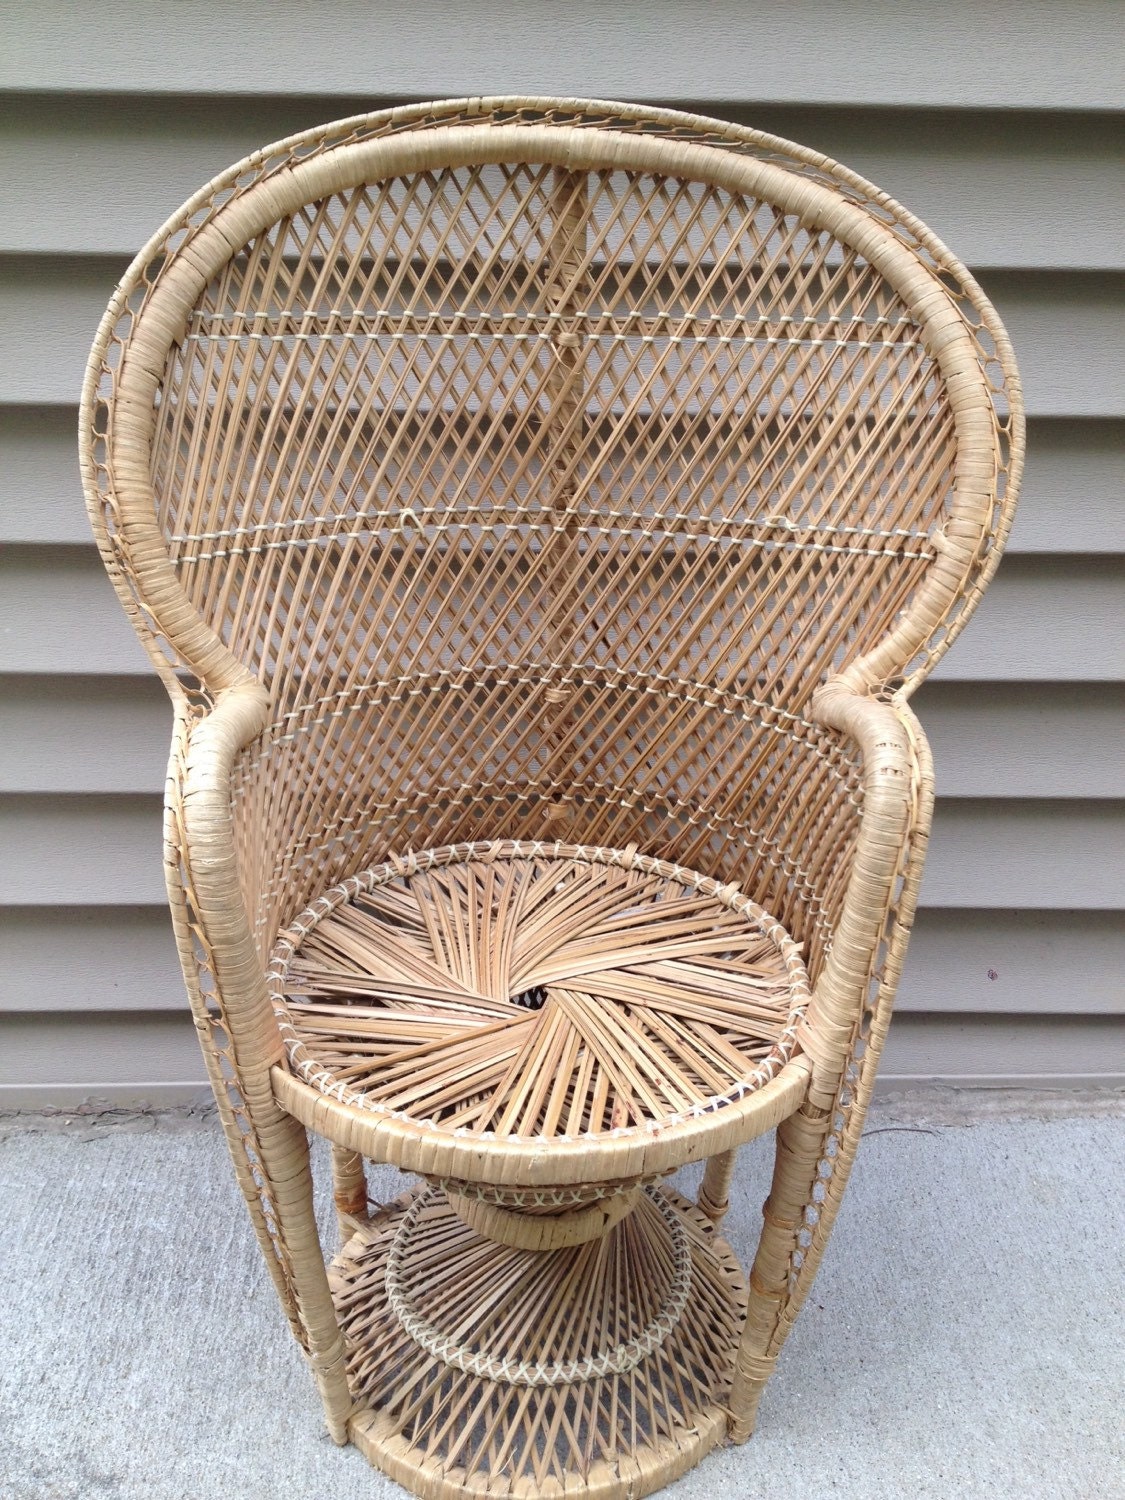 Photo Ways and Tools for Making Rattan Woven Pariaman